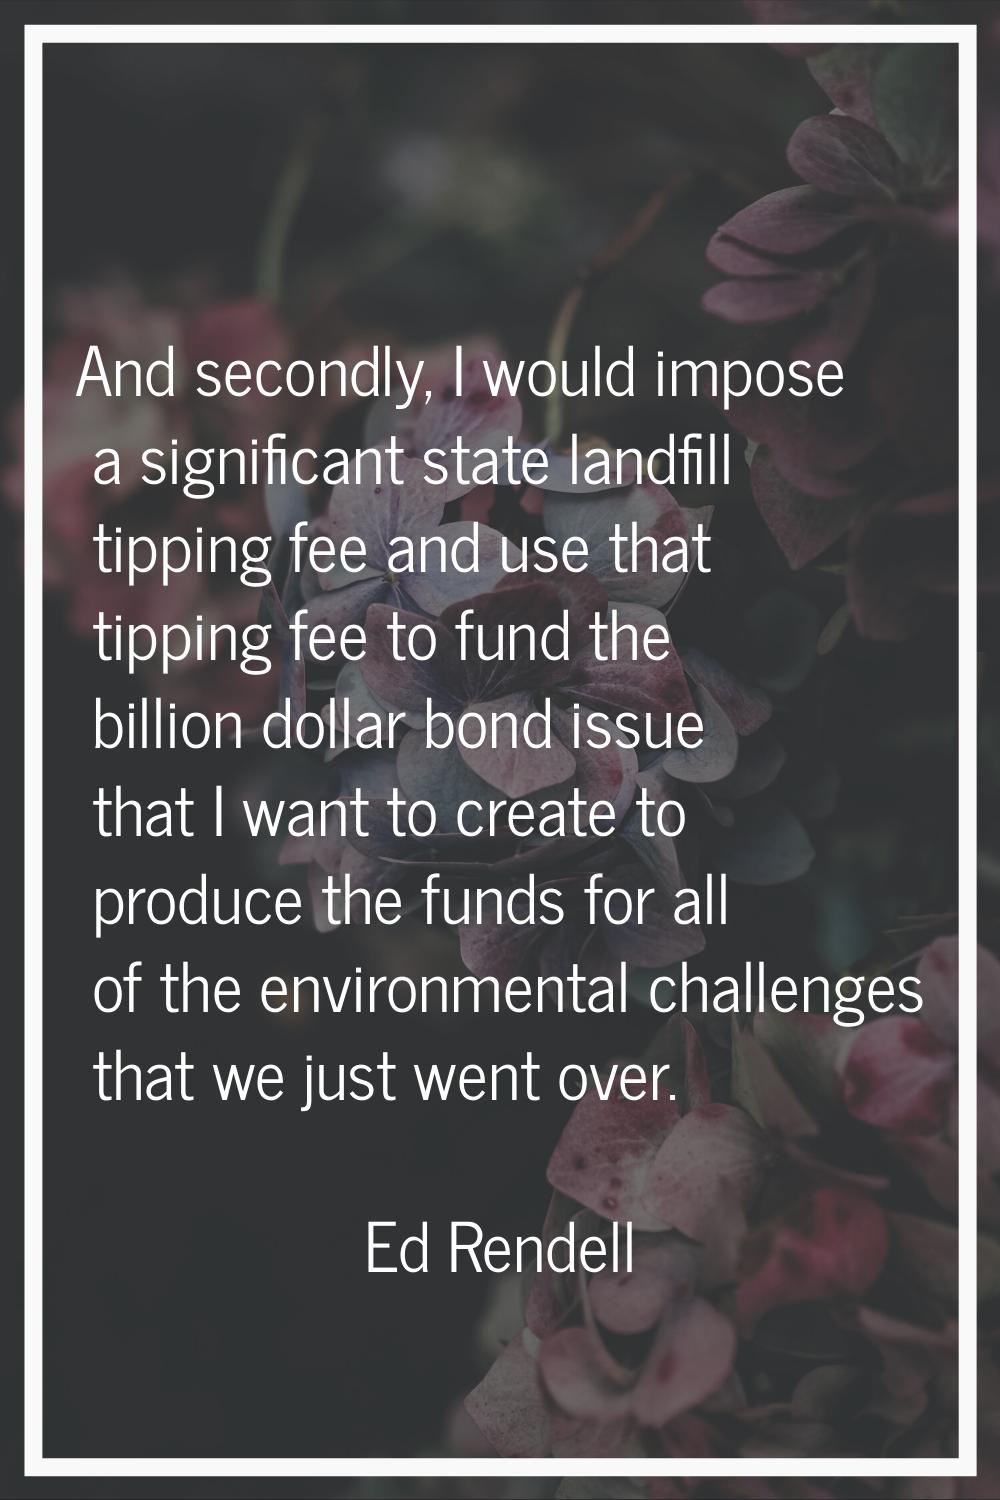 And secondly, I would impose a significant state landfill tipping fee and use that tipping fee to f